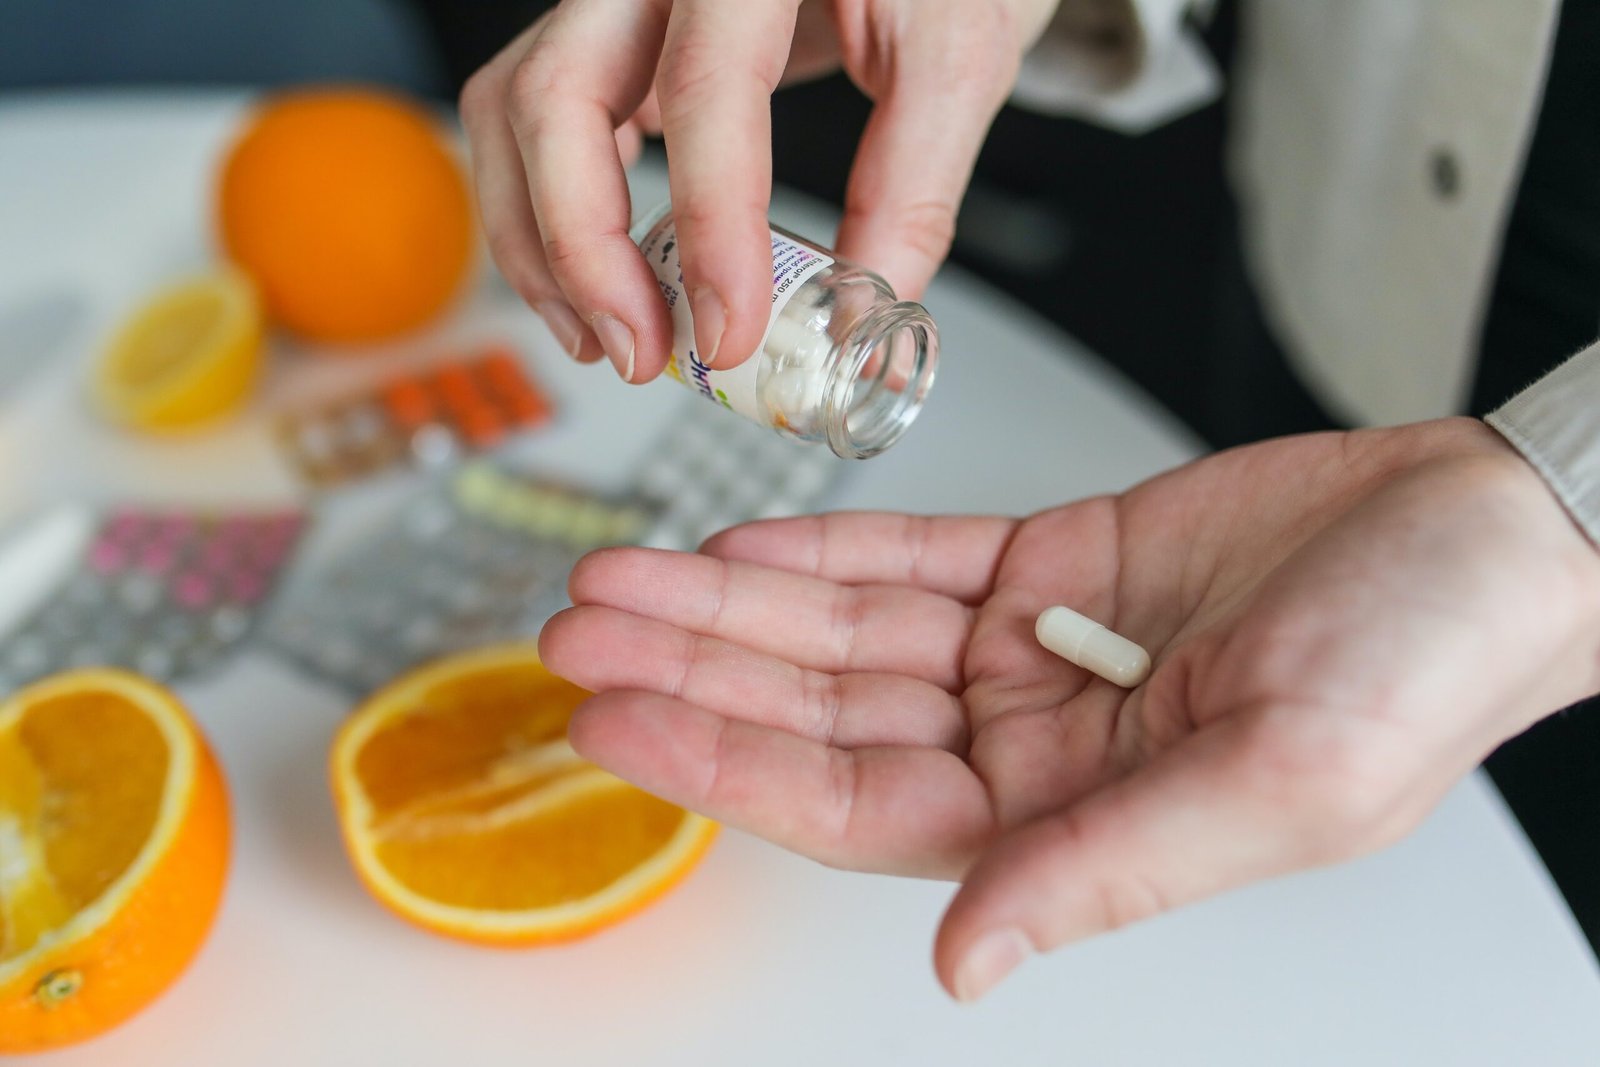 How To Treat Chilblains – The Vitamin Deficiency Connection